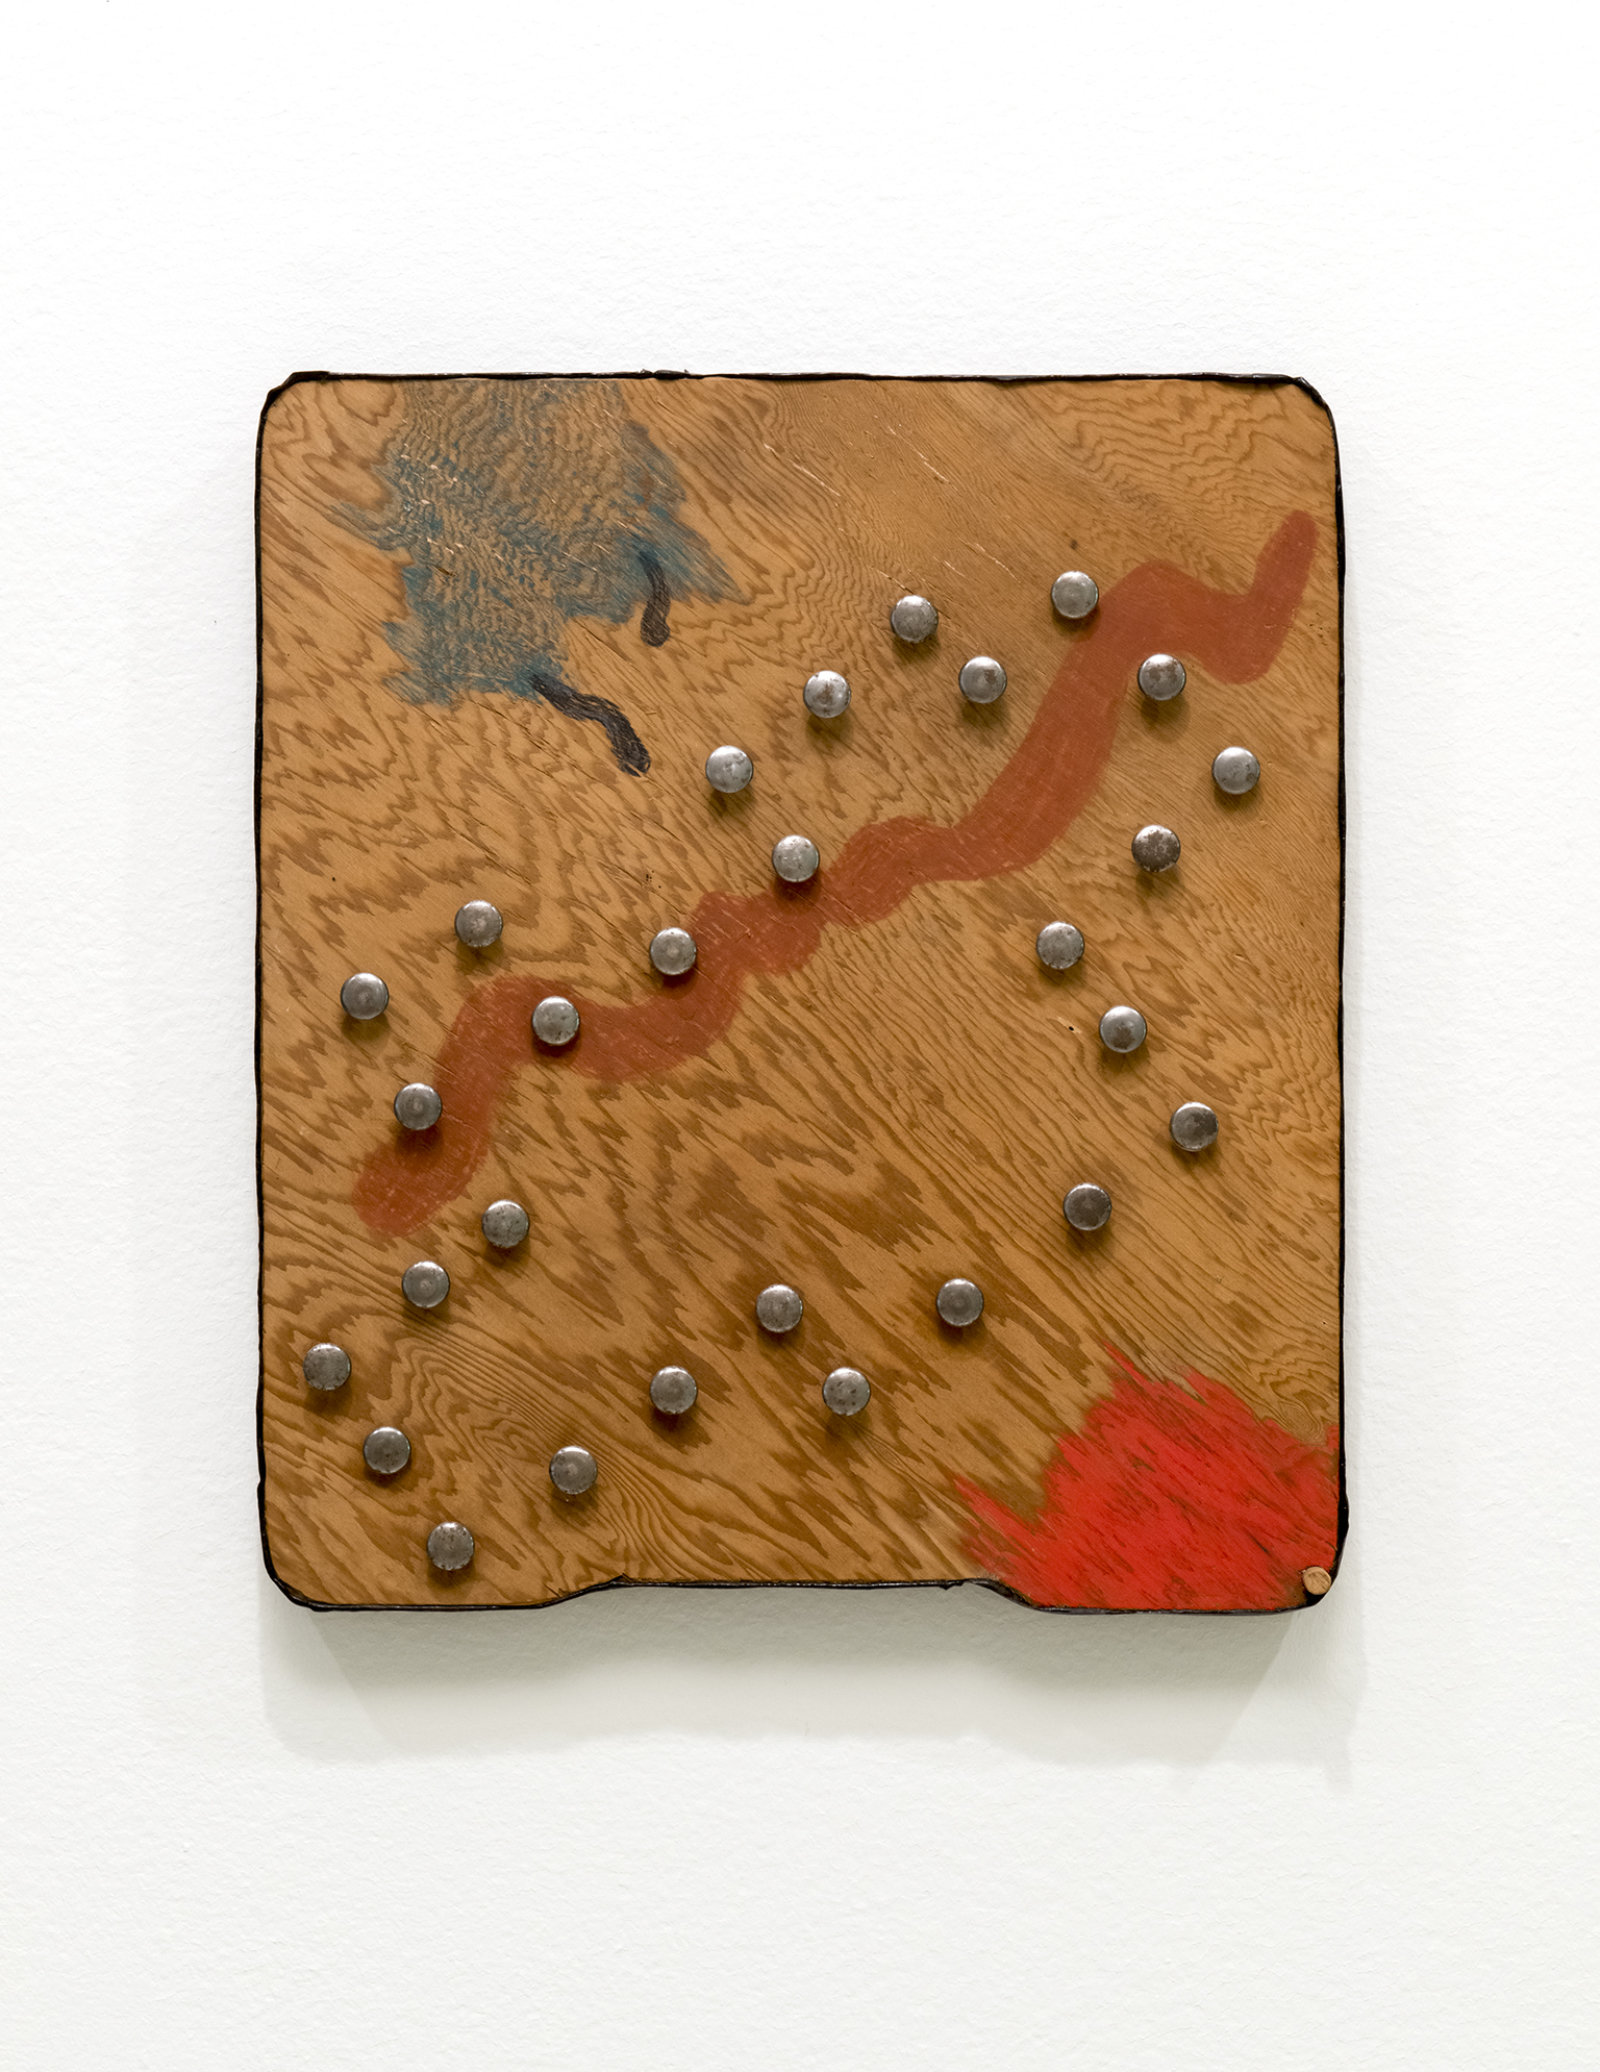 Jerry Pethick, Digital Shadow, 1993, wood, metal, paint, silicone, crayon, 18 x 16 x 1 in. (46 x 41 x 4 cm)